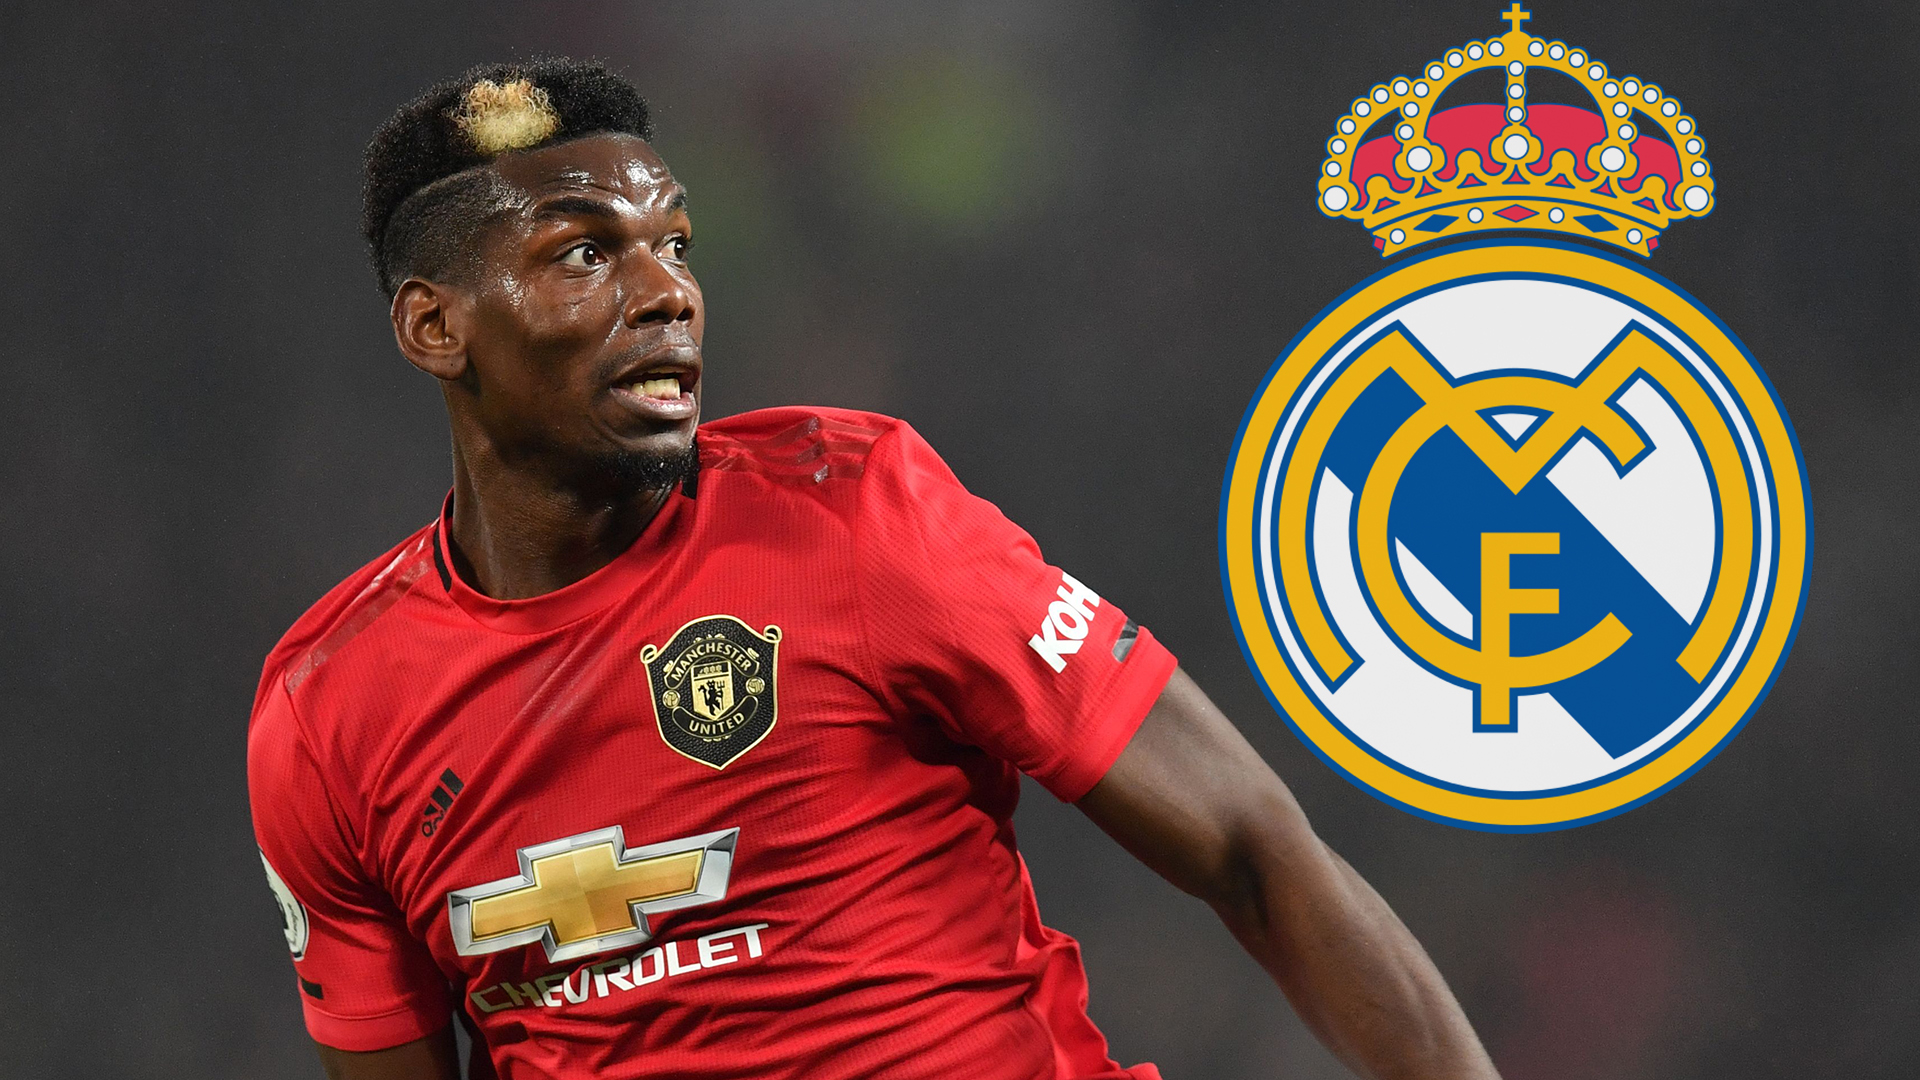 Paul pogba, real madrid, Manchester United